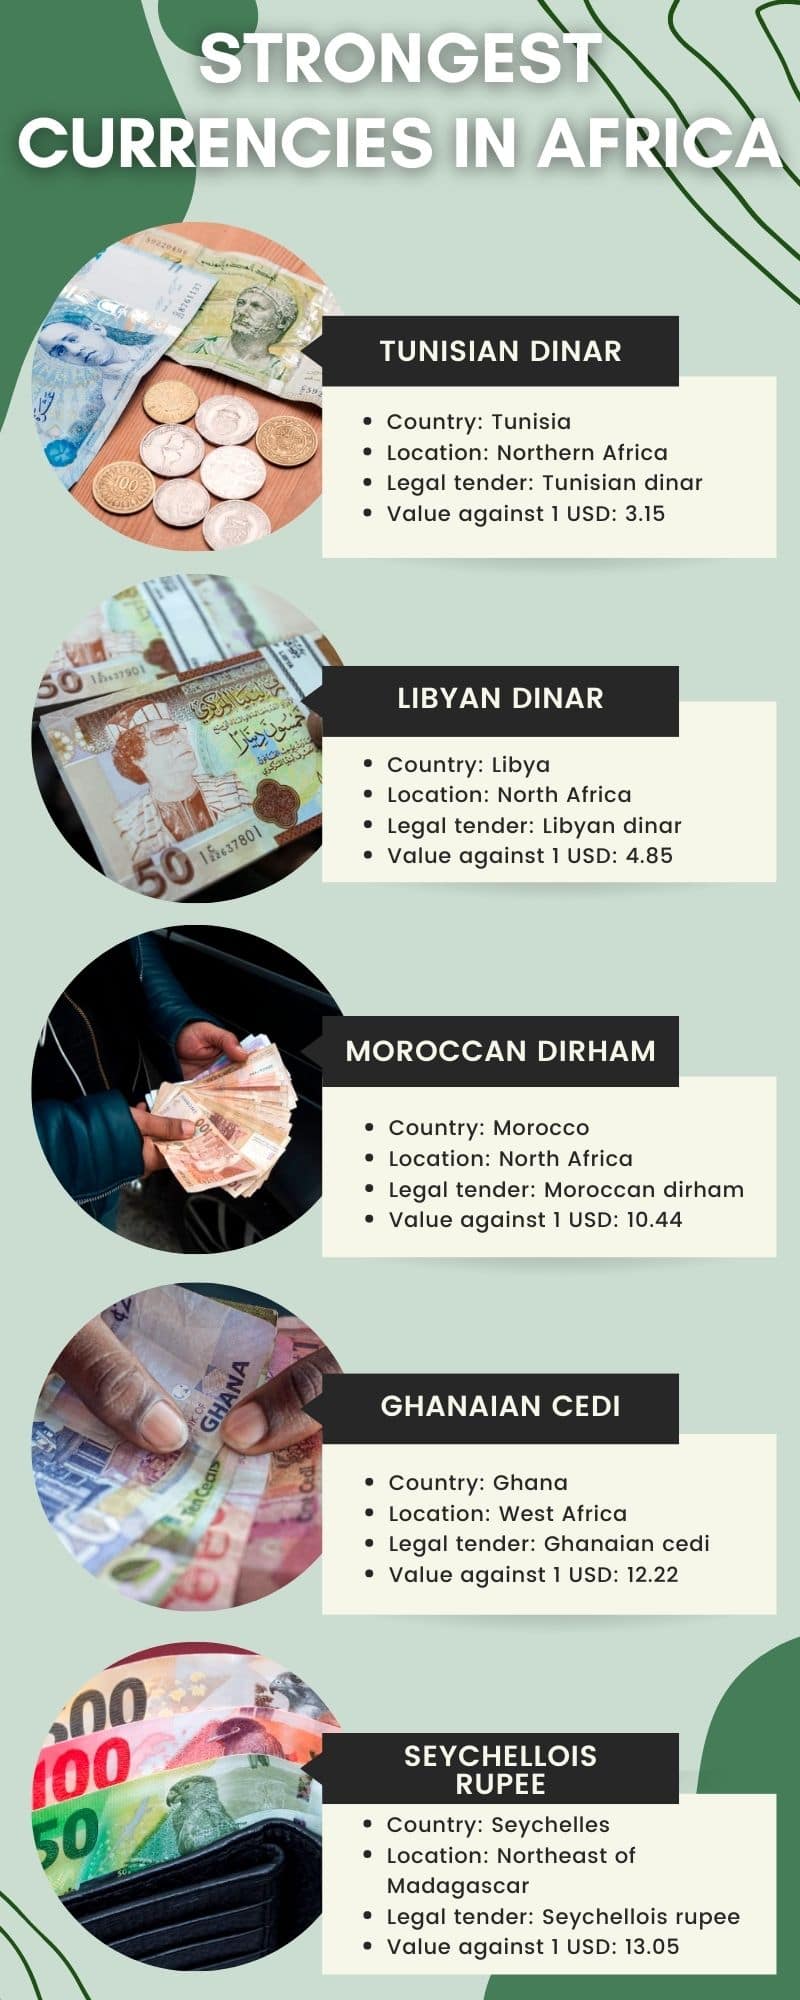 Strongest currencies in Africa